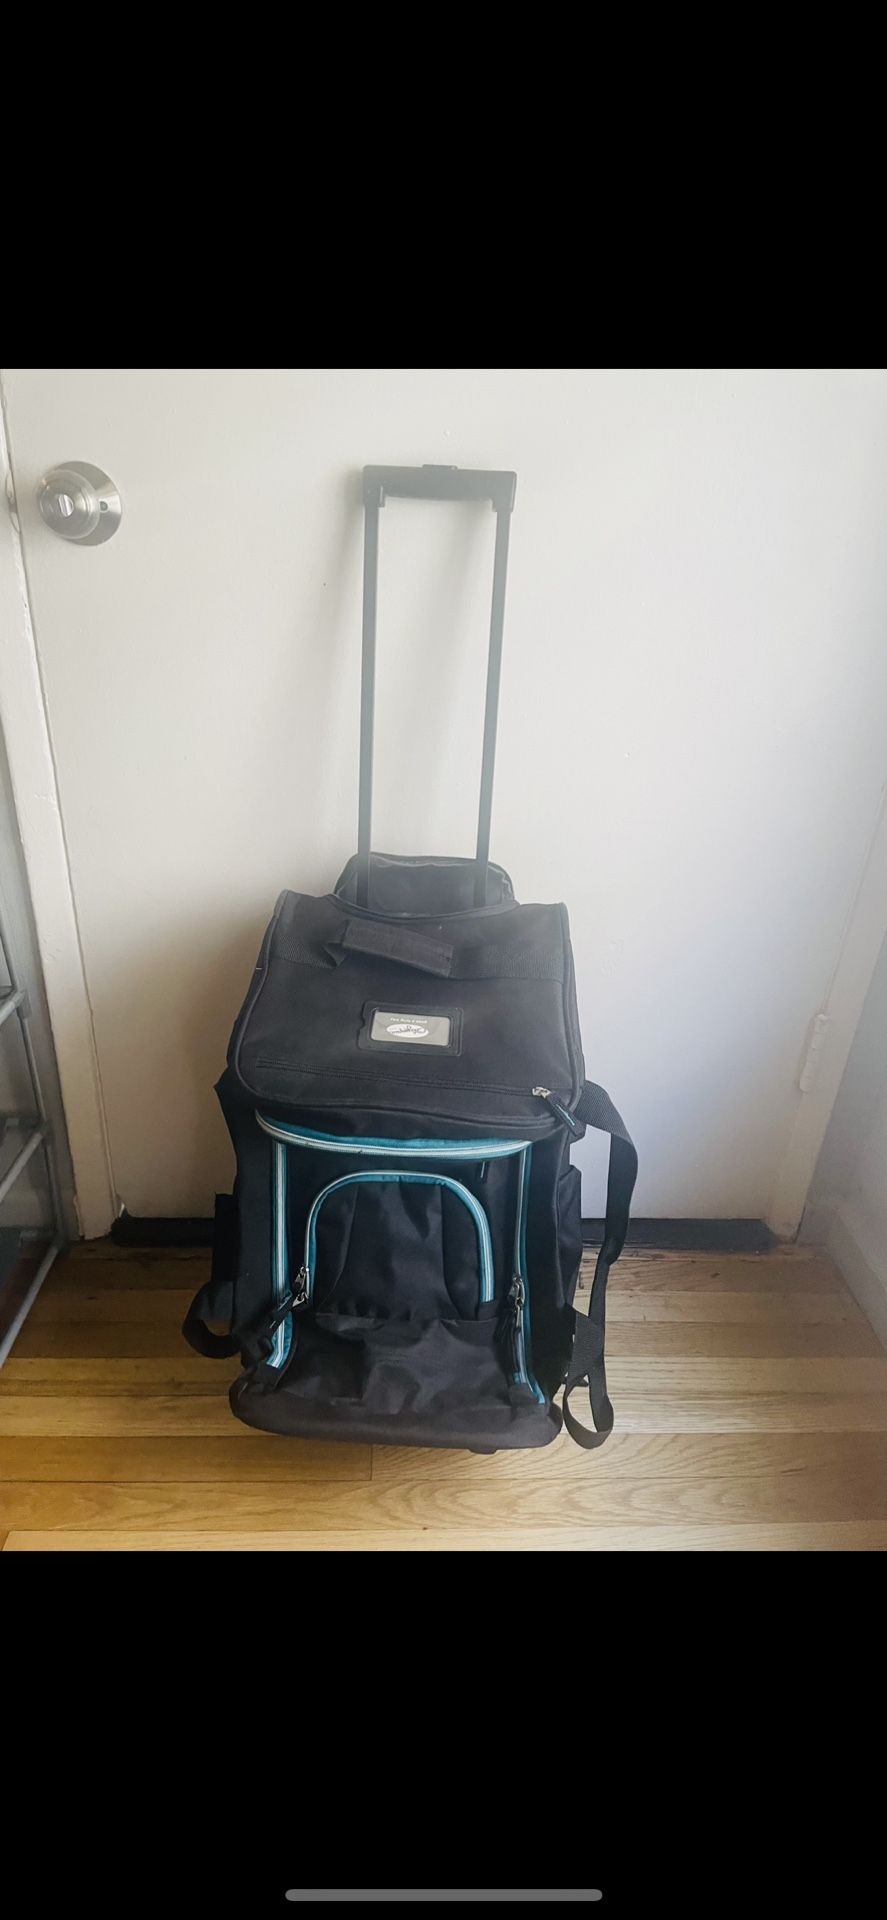 Olympia USA Rolling Duffel / Carry On - Feel Free to Ask Questions